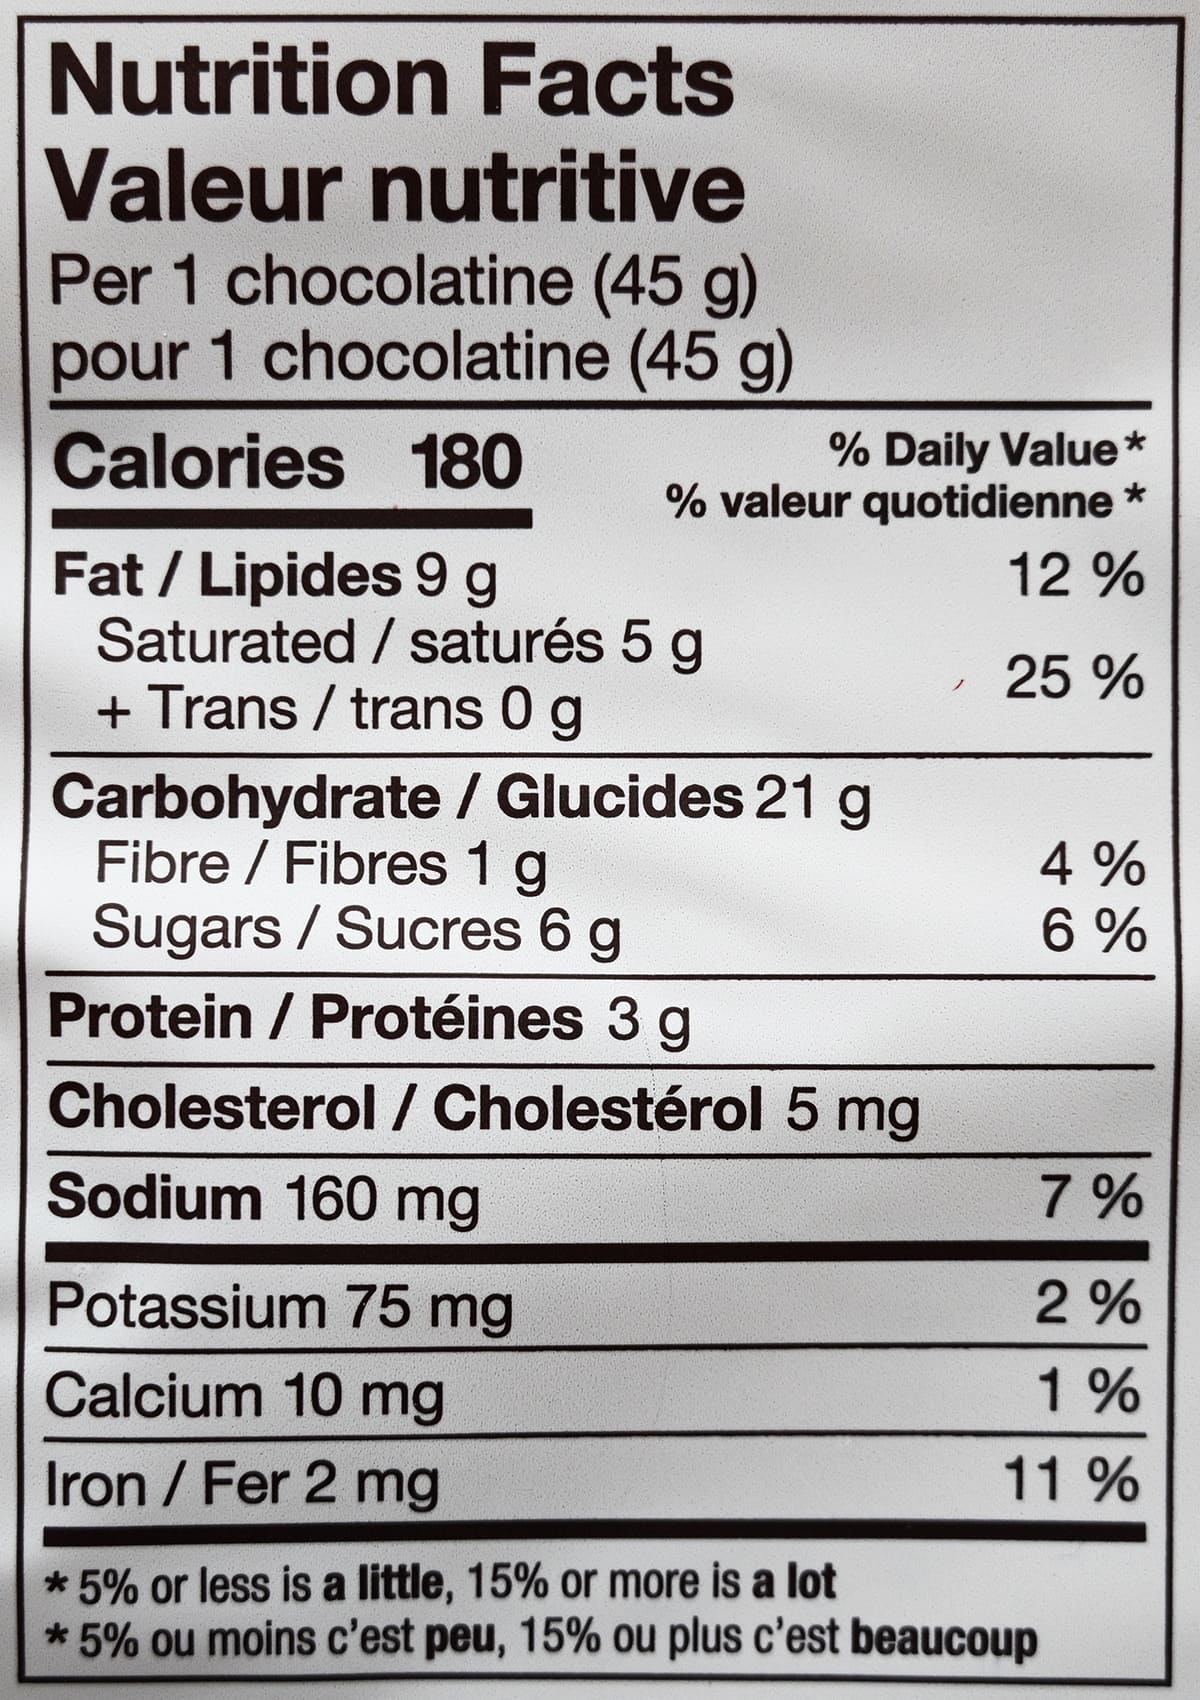 Image of the nutrition facts for the Chocolatine from the back of the bag.